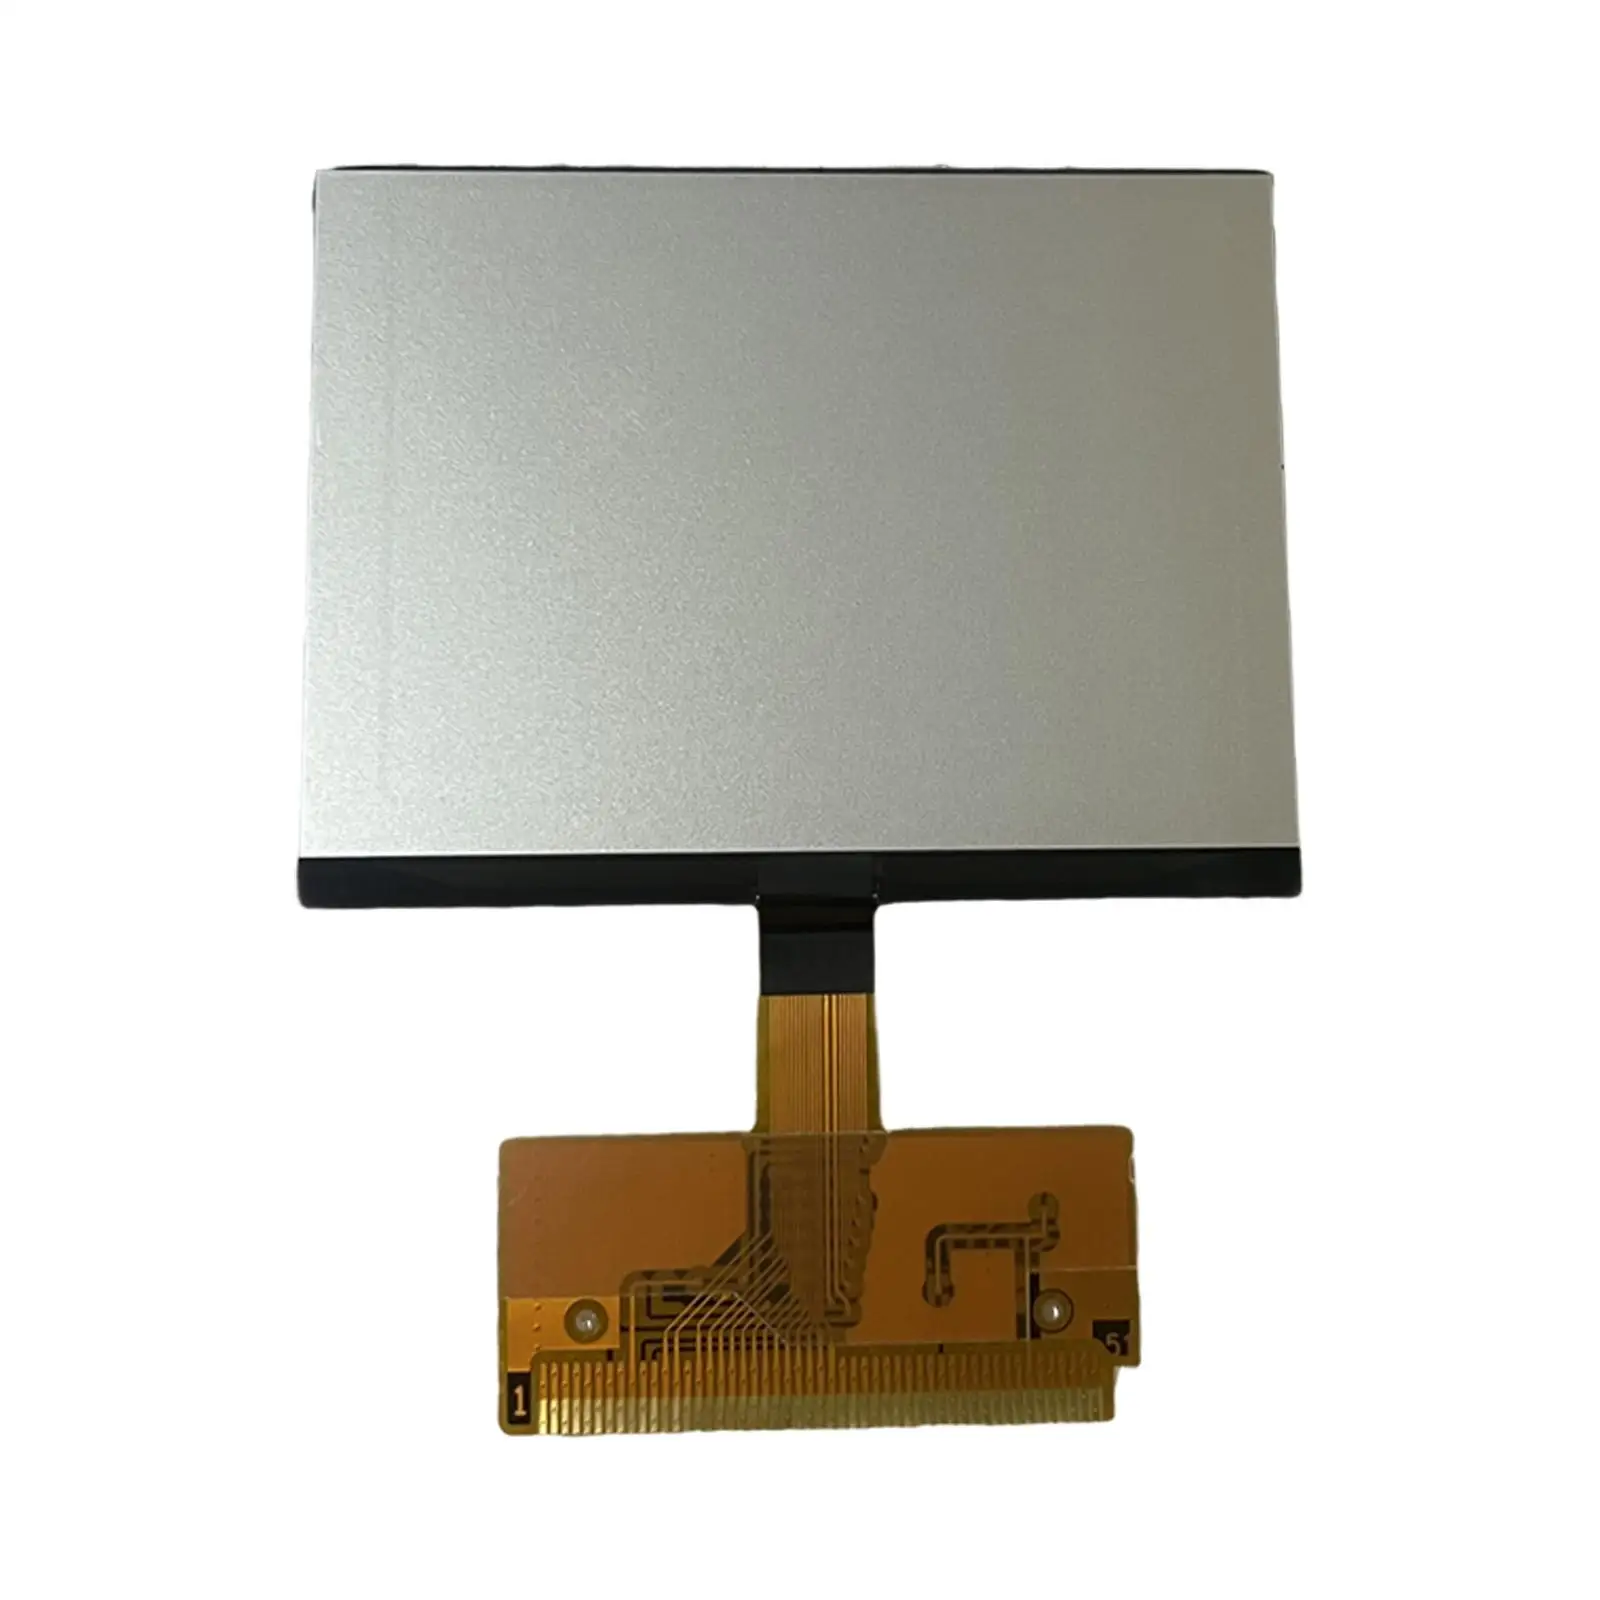 LCD Display Replacement Automotive Accessories for Audi A3 A4 Vdo